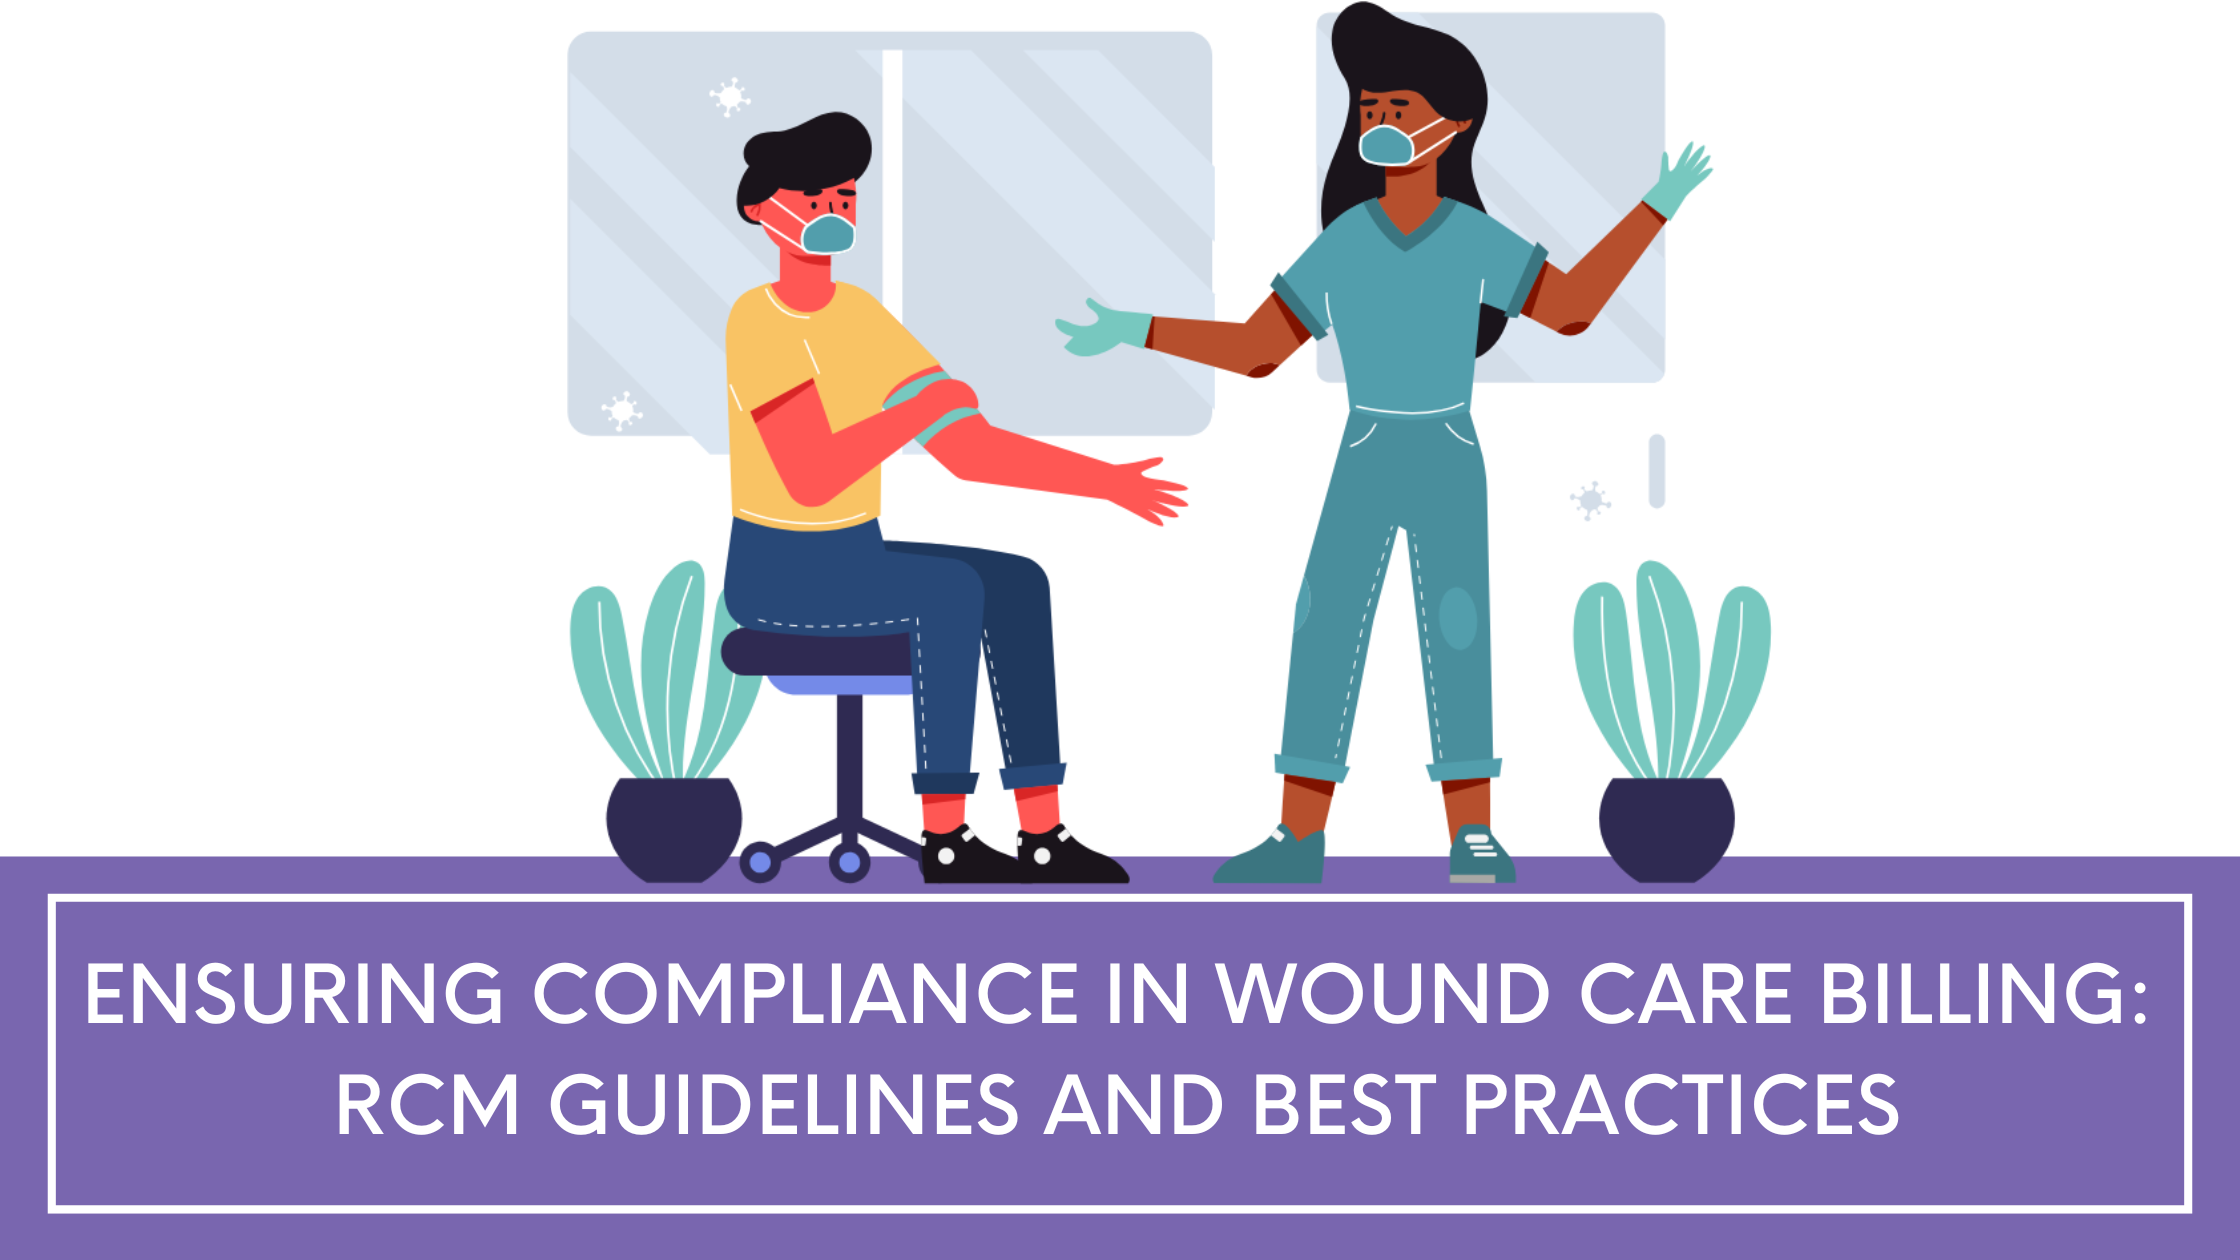 Wound care billing: RCM Guidelines